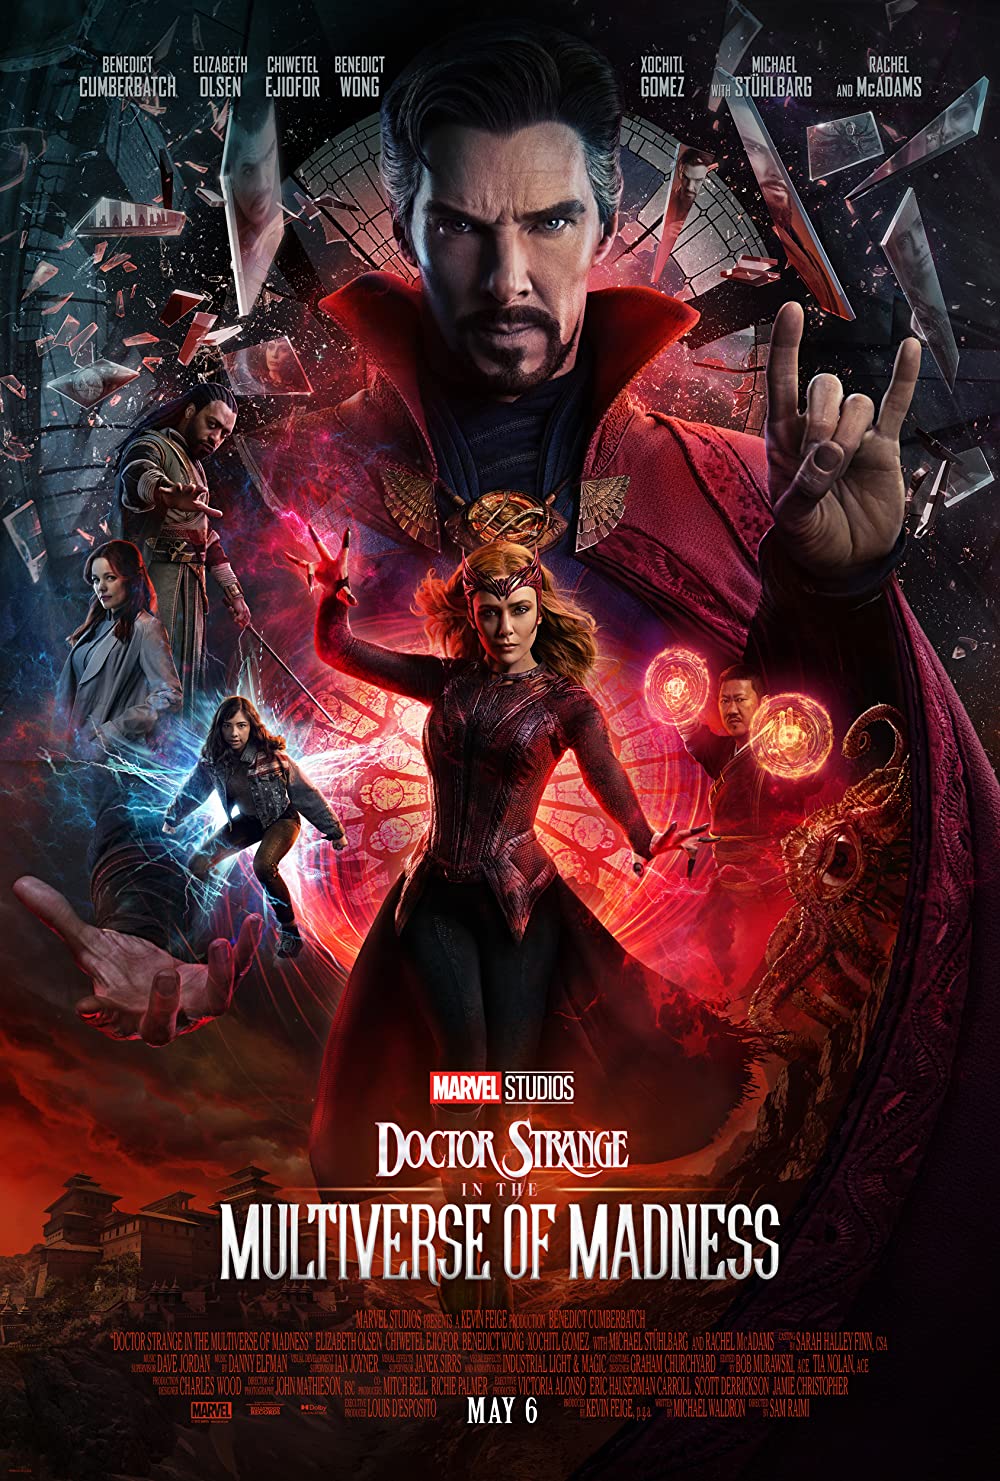 Doctor Strange in the Multiverse of Madness (2022) Hindi Dubbed (Cleaned) 1080p HQ HDCAMRip x264 2.7GB Download